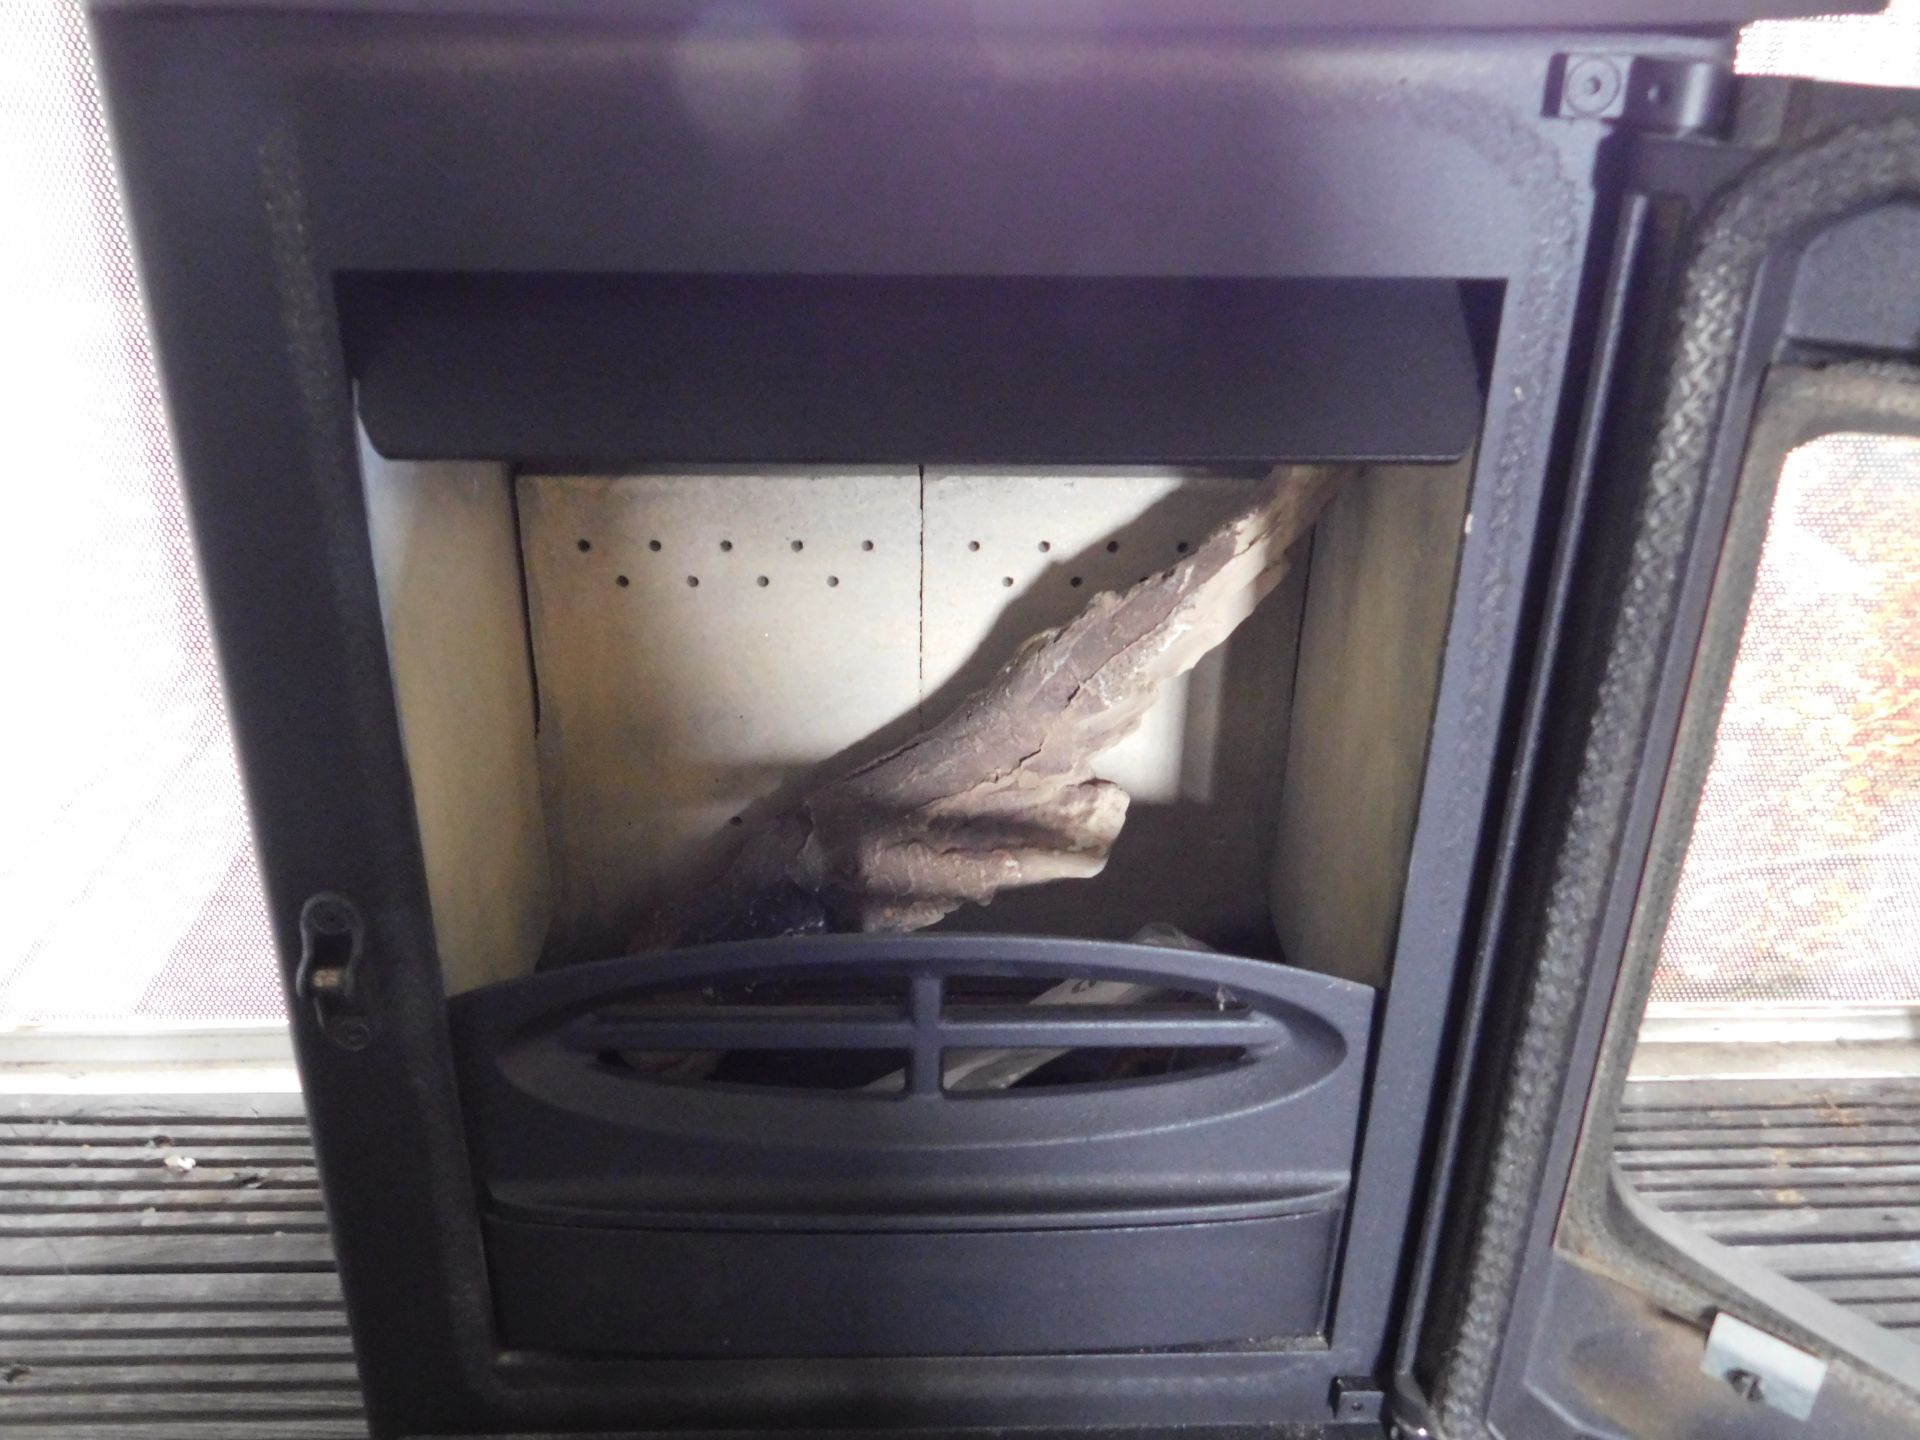 Ex-Display Charnwood “C 4 Duo Blu” 4.9kw Multifuel Stove (Where the company’s description/price - Image 2 of 3